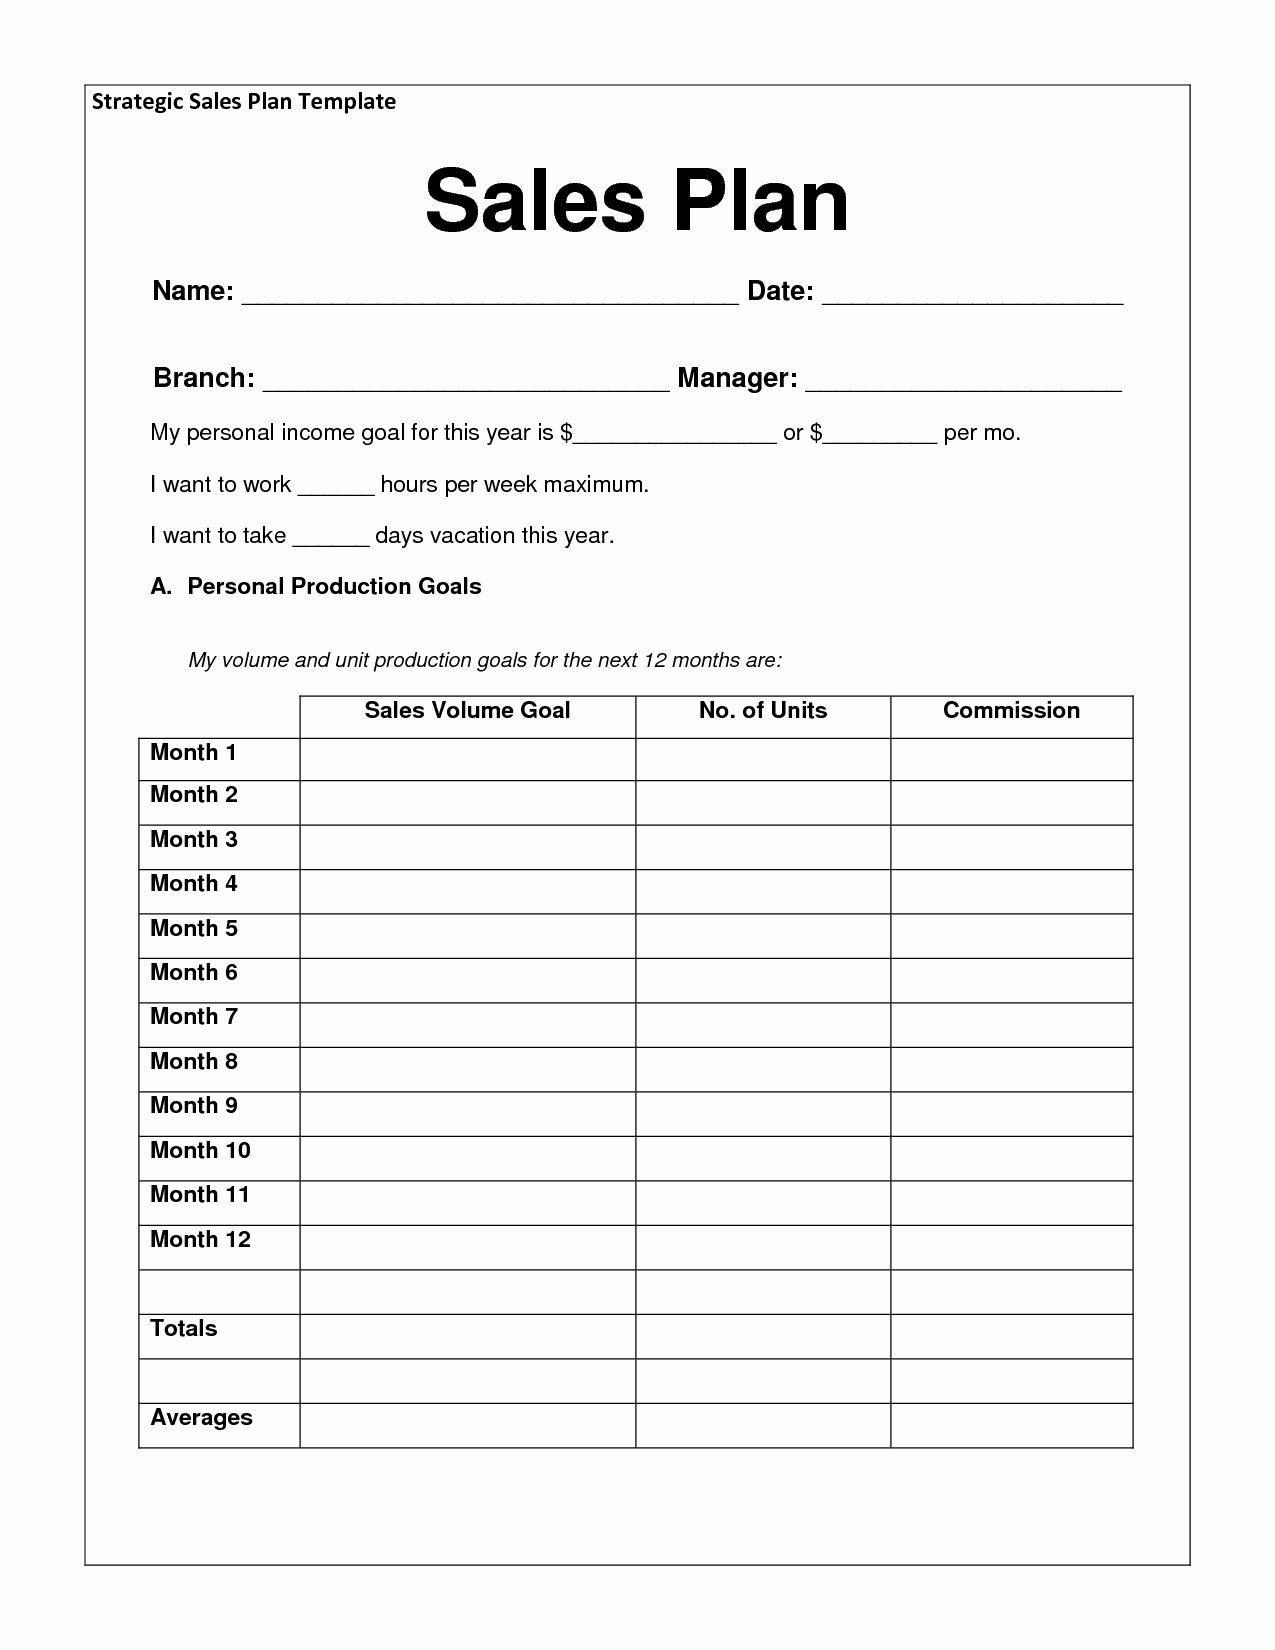 Sales Plan Template Word Lovely Sales Plan Templates Word Excel Samples